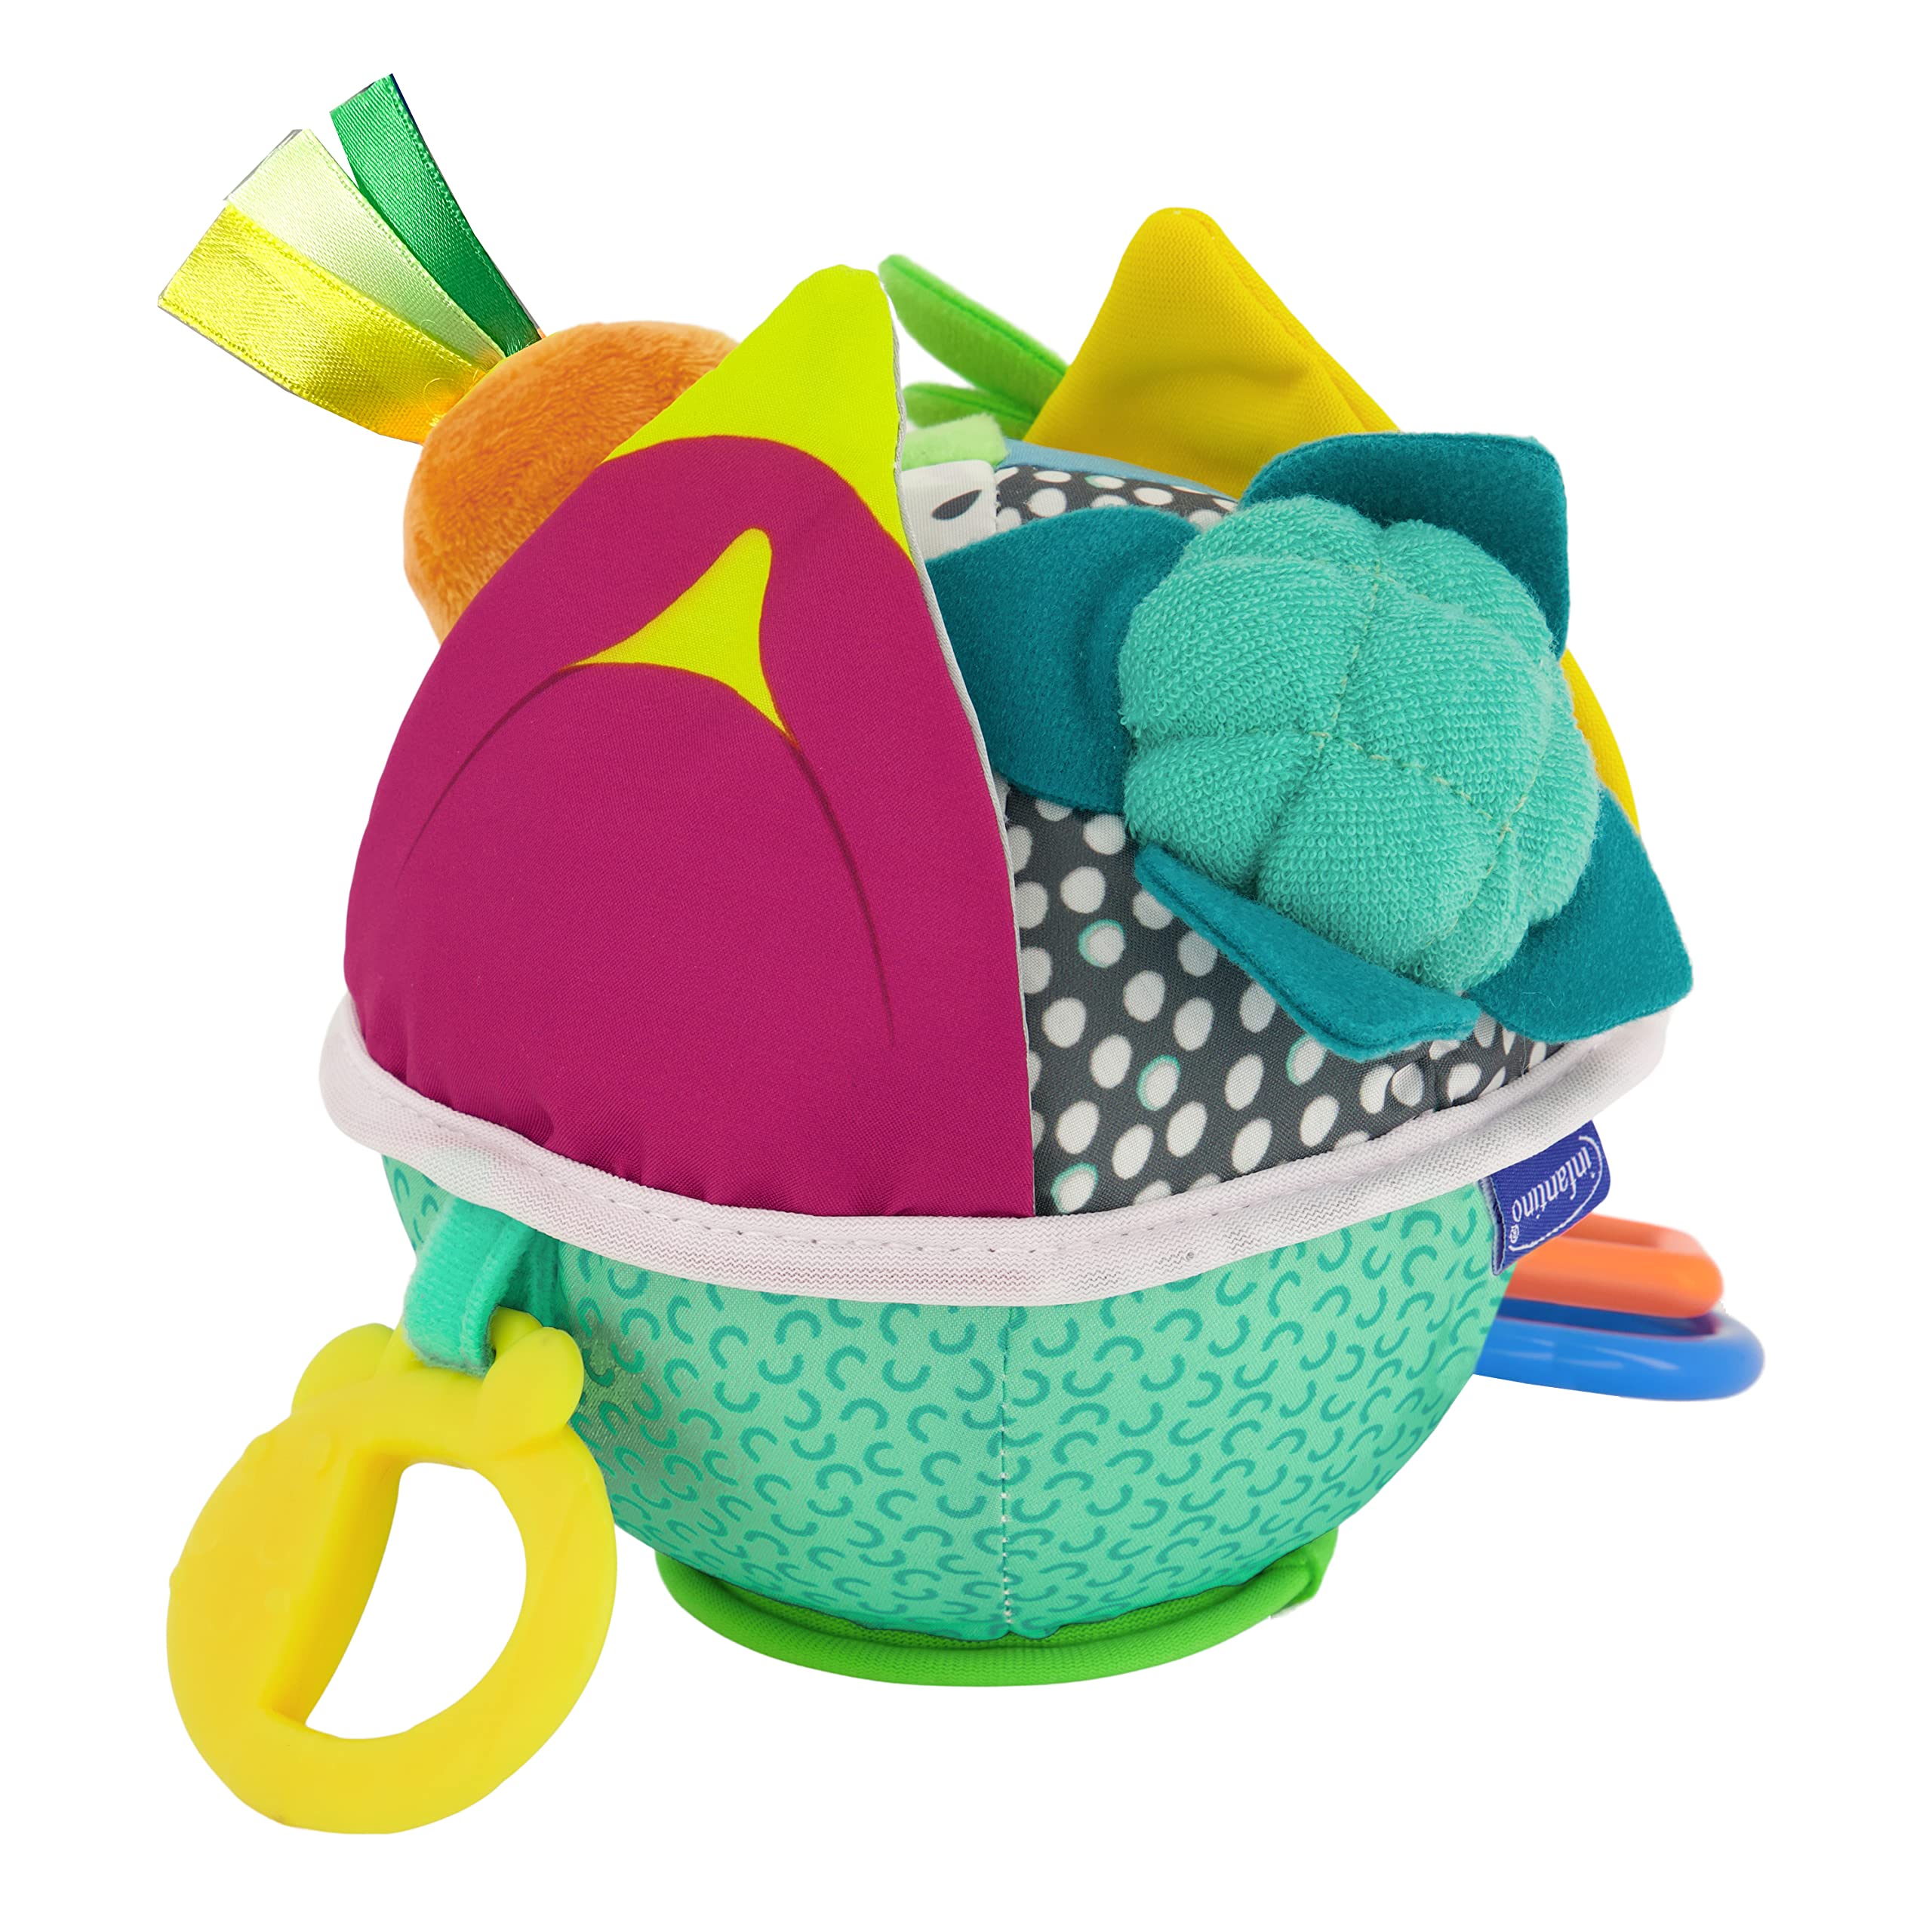 Infantino Busy Lil’ Sensory Ball - 9 Activities, Teether, Selfie Mirror, Rattle Sounds, Encourages Fine and Gross Motor Skill Development, for Babies 3M+